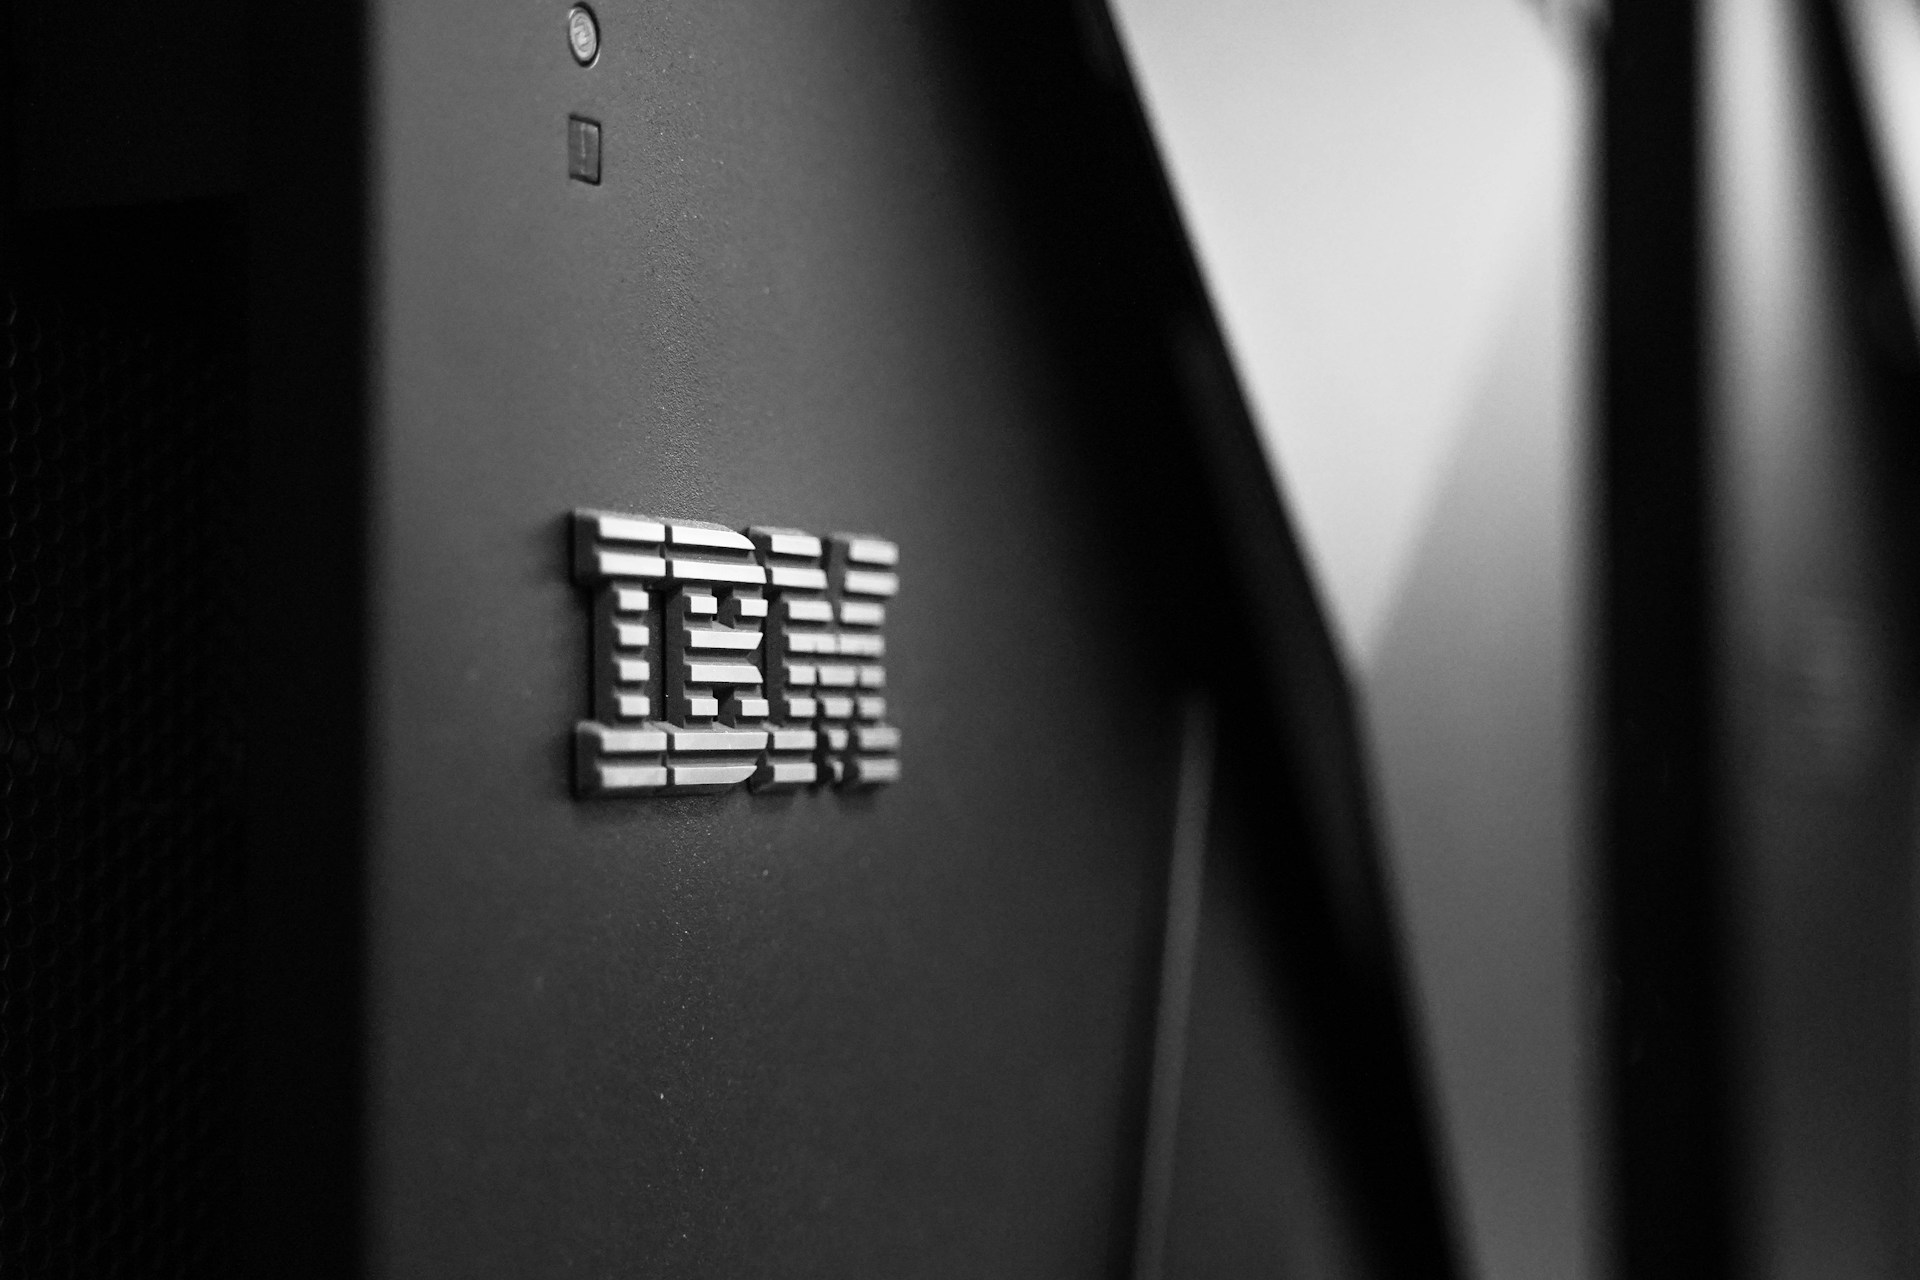 Ibm Computers Branding Guide - Brand: Guide To Building A Strong Identity